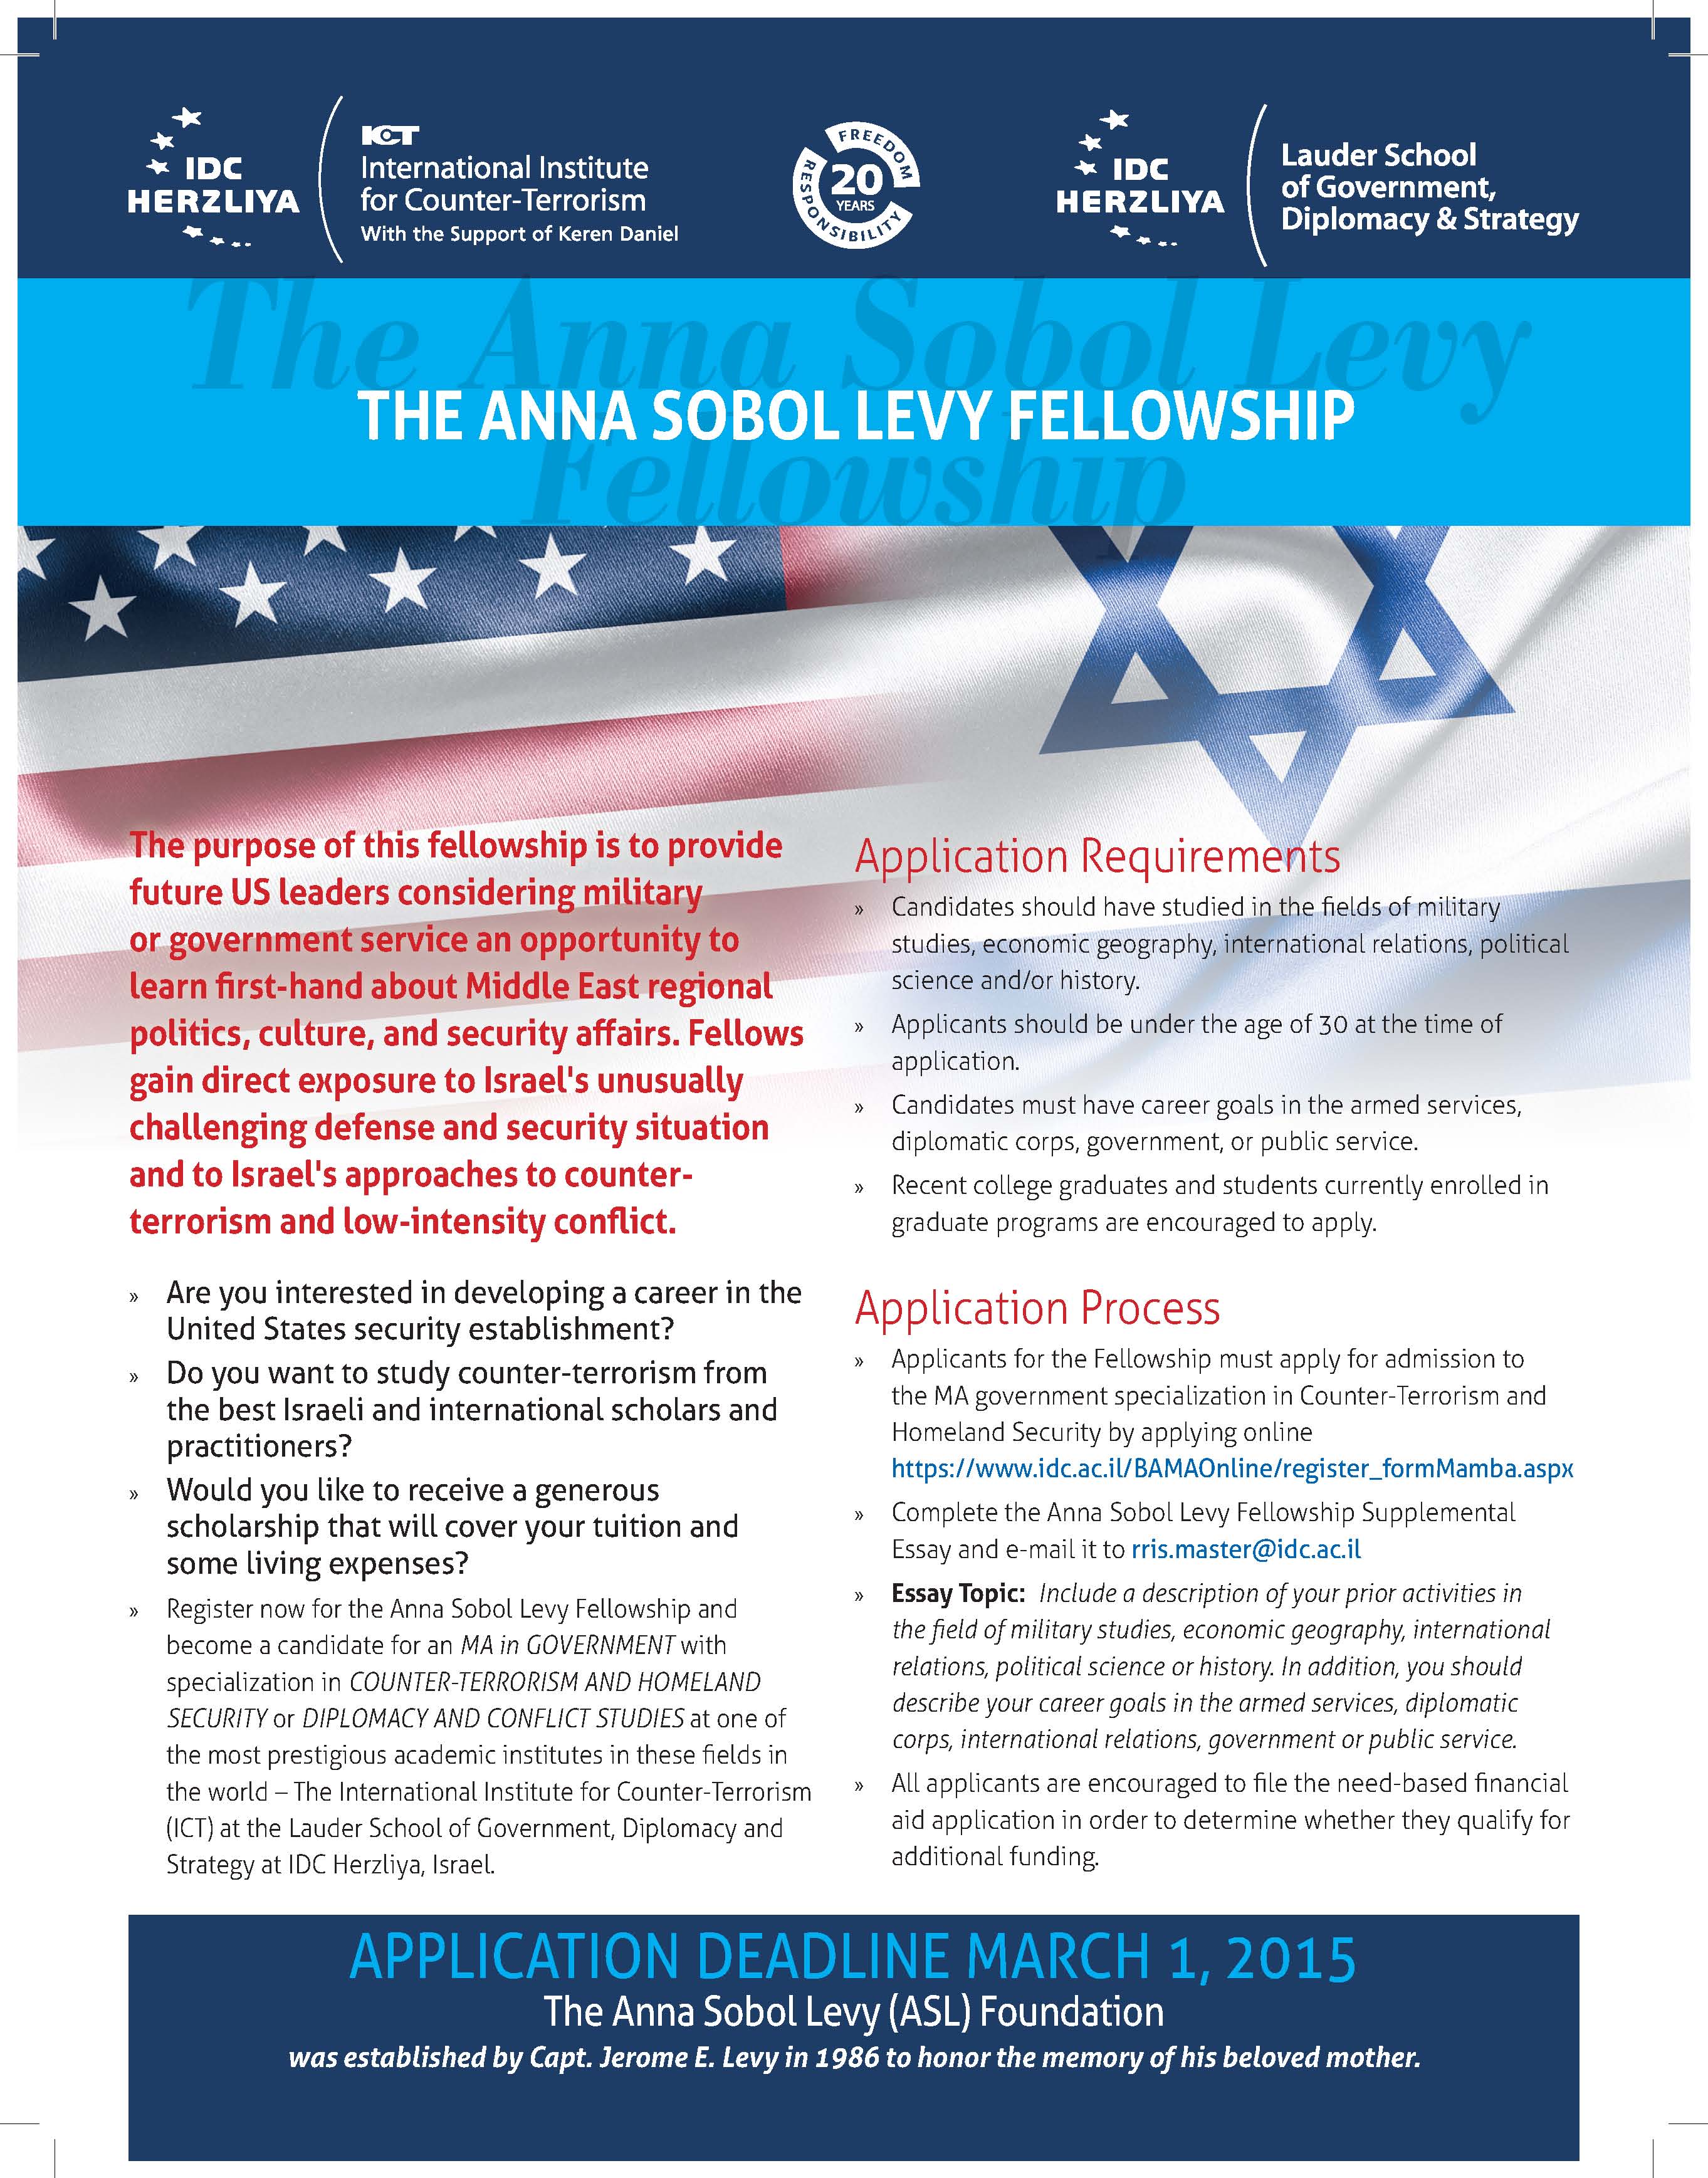 » Are you interested in developing a career in the United States security establishment? » Do you want to study counter-terrorism from the best Israeli and international scholars and practitioners? » Would you like to receive a generous scholarship that will cover your tuition and some living expenses? » Register now for the Anna Sobol Levy Fellowship and become a candidate for an MA in GOVERNMENT with specialization in COUNTER-TERRORISM AND HOMELAND SECURITY or Diplomacy and Conflict Studies at one of the most prestigious academic institutes in these fields in the world – The International Institute for Counter-Terrorism (ICT) at the Lauder School of Government, Diplomacy and Strategy at IDC Herzliya, Israel. The Anna Sobol Levy Fellowship THE ANNA SOBOL LEVY FELLOWSHIP Application Deadline March 1, 2015 The Anna Sobol Levy (ASL) Foundation was established by Capt. Jerome E. Levy in 1986 to honor the memory of his beloved mother. Application Requirements » Candidates should have studied in the fields of military studies, economic geography, international relations, political science and/or history. » Applicants should be under the age of 30 at the time of application. » Candidates must have career goals in the armed services, diplomatic corps, government, or public service. » Recent college graduates and students currently enrolled in graduate programs are encouraged to apply. Application Process » Applicants for the Fellowship must apply for admission to the MA government specialization in Counter-Terrorism and Homeland Security by applying online https://www.idc.ac.il/BAMAOnline/register_formMamba.aspx » Complete the Anna Sobol Levy Fellowship Supplemental Essay and e-mail it to rris.master@idc.ac.il » Essay Topic: Include a description of your prior activities in the field of military studies, economic geography, international relations, political science or history. In addition, you should describe your career goals in the armed services, diplomatic corps, international relations, government or public service. » All applicants are encouraged to file the need-based financial aid application in order to determine whether they qualify for additional funding. The purpose of this fellowship is to provide future US leaders considering military or government service an opportunity to learn first-hand about Middle East regional politics, culture, and security affairs. Fellows gain direct exposure to Israel's unusually challenging defense and security situation and to Israel's approaches to counterterrorism and low-intensity conflict.“A world-class center for the study of counter-terrorism, ICT keeps scholars and operators up to speed with the latest trends in the field. Living on the fault lines of the problems posed by terrorism gives ICT’s work an immediacy and insight that is unparalleled.” Gen. Montgomery C. Meigs, Former Commander, US Army, Europe “The Interdisciplinary Center at Herzliya, through its International Institute for Counter-Terrorism, provides one of the best academic settings in the world for the study of the dynamics of and defense against international terrorism. Staffed by a broad range of experts that combine both practical and academic expertise in combating terrorism, study at the institute provides unique and useful insight into one of the 21st century’s most difficult challenges.” Gen. John Abizaid, Former Commander of the United States Central Command (CENTCOM), USA “We have maintained a formal and very personal relationship with ICT for almost a decade. It is the premier counter-terrorism learning institution, serving as a critical hub for the counter-terrorism, intelligence and defense communities around the world. ICT’s programs are essential for anyone who wants to be taken seriously in the terrorism domain.” Dr. Erroll Southers, Associate Director of Research Transition, CREATE, University of Southern California (USC), and Former Presidential nominee (President Obama Administration) for Assistant Secretary of the TSA, USA “The International Institute for Counter-Terrorism is a world-class organization that is dedicated to educating current and future leaders about the complex phenomenon of terrorism and the best ways to counter this threat. ICT combines its first-rate scholars with a vast network of leading counter-terrorism practitioners and policymakers to provide its students with a one-of-a-kind educational experience.” Major Dr. Bryan Price, Director, Combating Terrorism Center, US Military Academy, West Point, USA “There is no better place to educate future leaders in the international struggle against terrorism than the International Institute for Counter-Terrorism at Herzliya’s Interdisciplinary Center. The depth and breadth of its academic programs, and its ability to draw in first-rate scholars from around the world, and its partnering with other centers in pursuit of understanding this phenomenon, marks ICT as head and shoulders above other institutions of its type. We at the George C. Marshall Center are privileged to have a close relationship with this cutting edge institution.” Lt. Gen. Keith Dayton, Director, Marshall Center Gen. John Abizaid Gen. Montgomery C. Meigs LTC John Kenkel, US Army Fellow at ICT during the Memorial Ceremony for the Victims of 9/11 Dr. Erroll Southers Major Dr. Bryan Price Lt. Gen. Keith Dayton From left to right: Dr. Boaz Ganor, Ambassador Dan Shapiro, Prime Minister Benjamin Netanyahu and Prof. Uriel Reichman during the Memorial Ceremony for the Victims of 9/11 and Terrorism Worldwide at ICT's 14th International Conference: World Summit on Counter-Terrorism